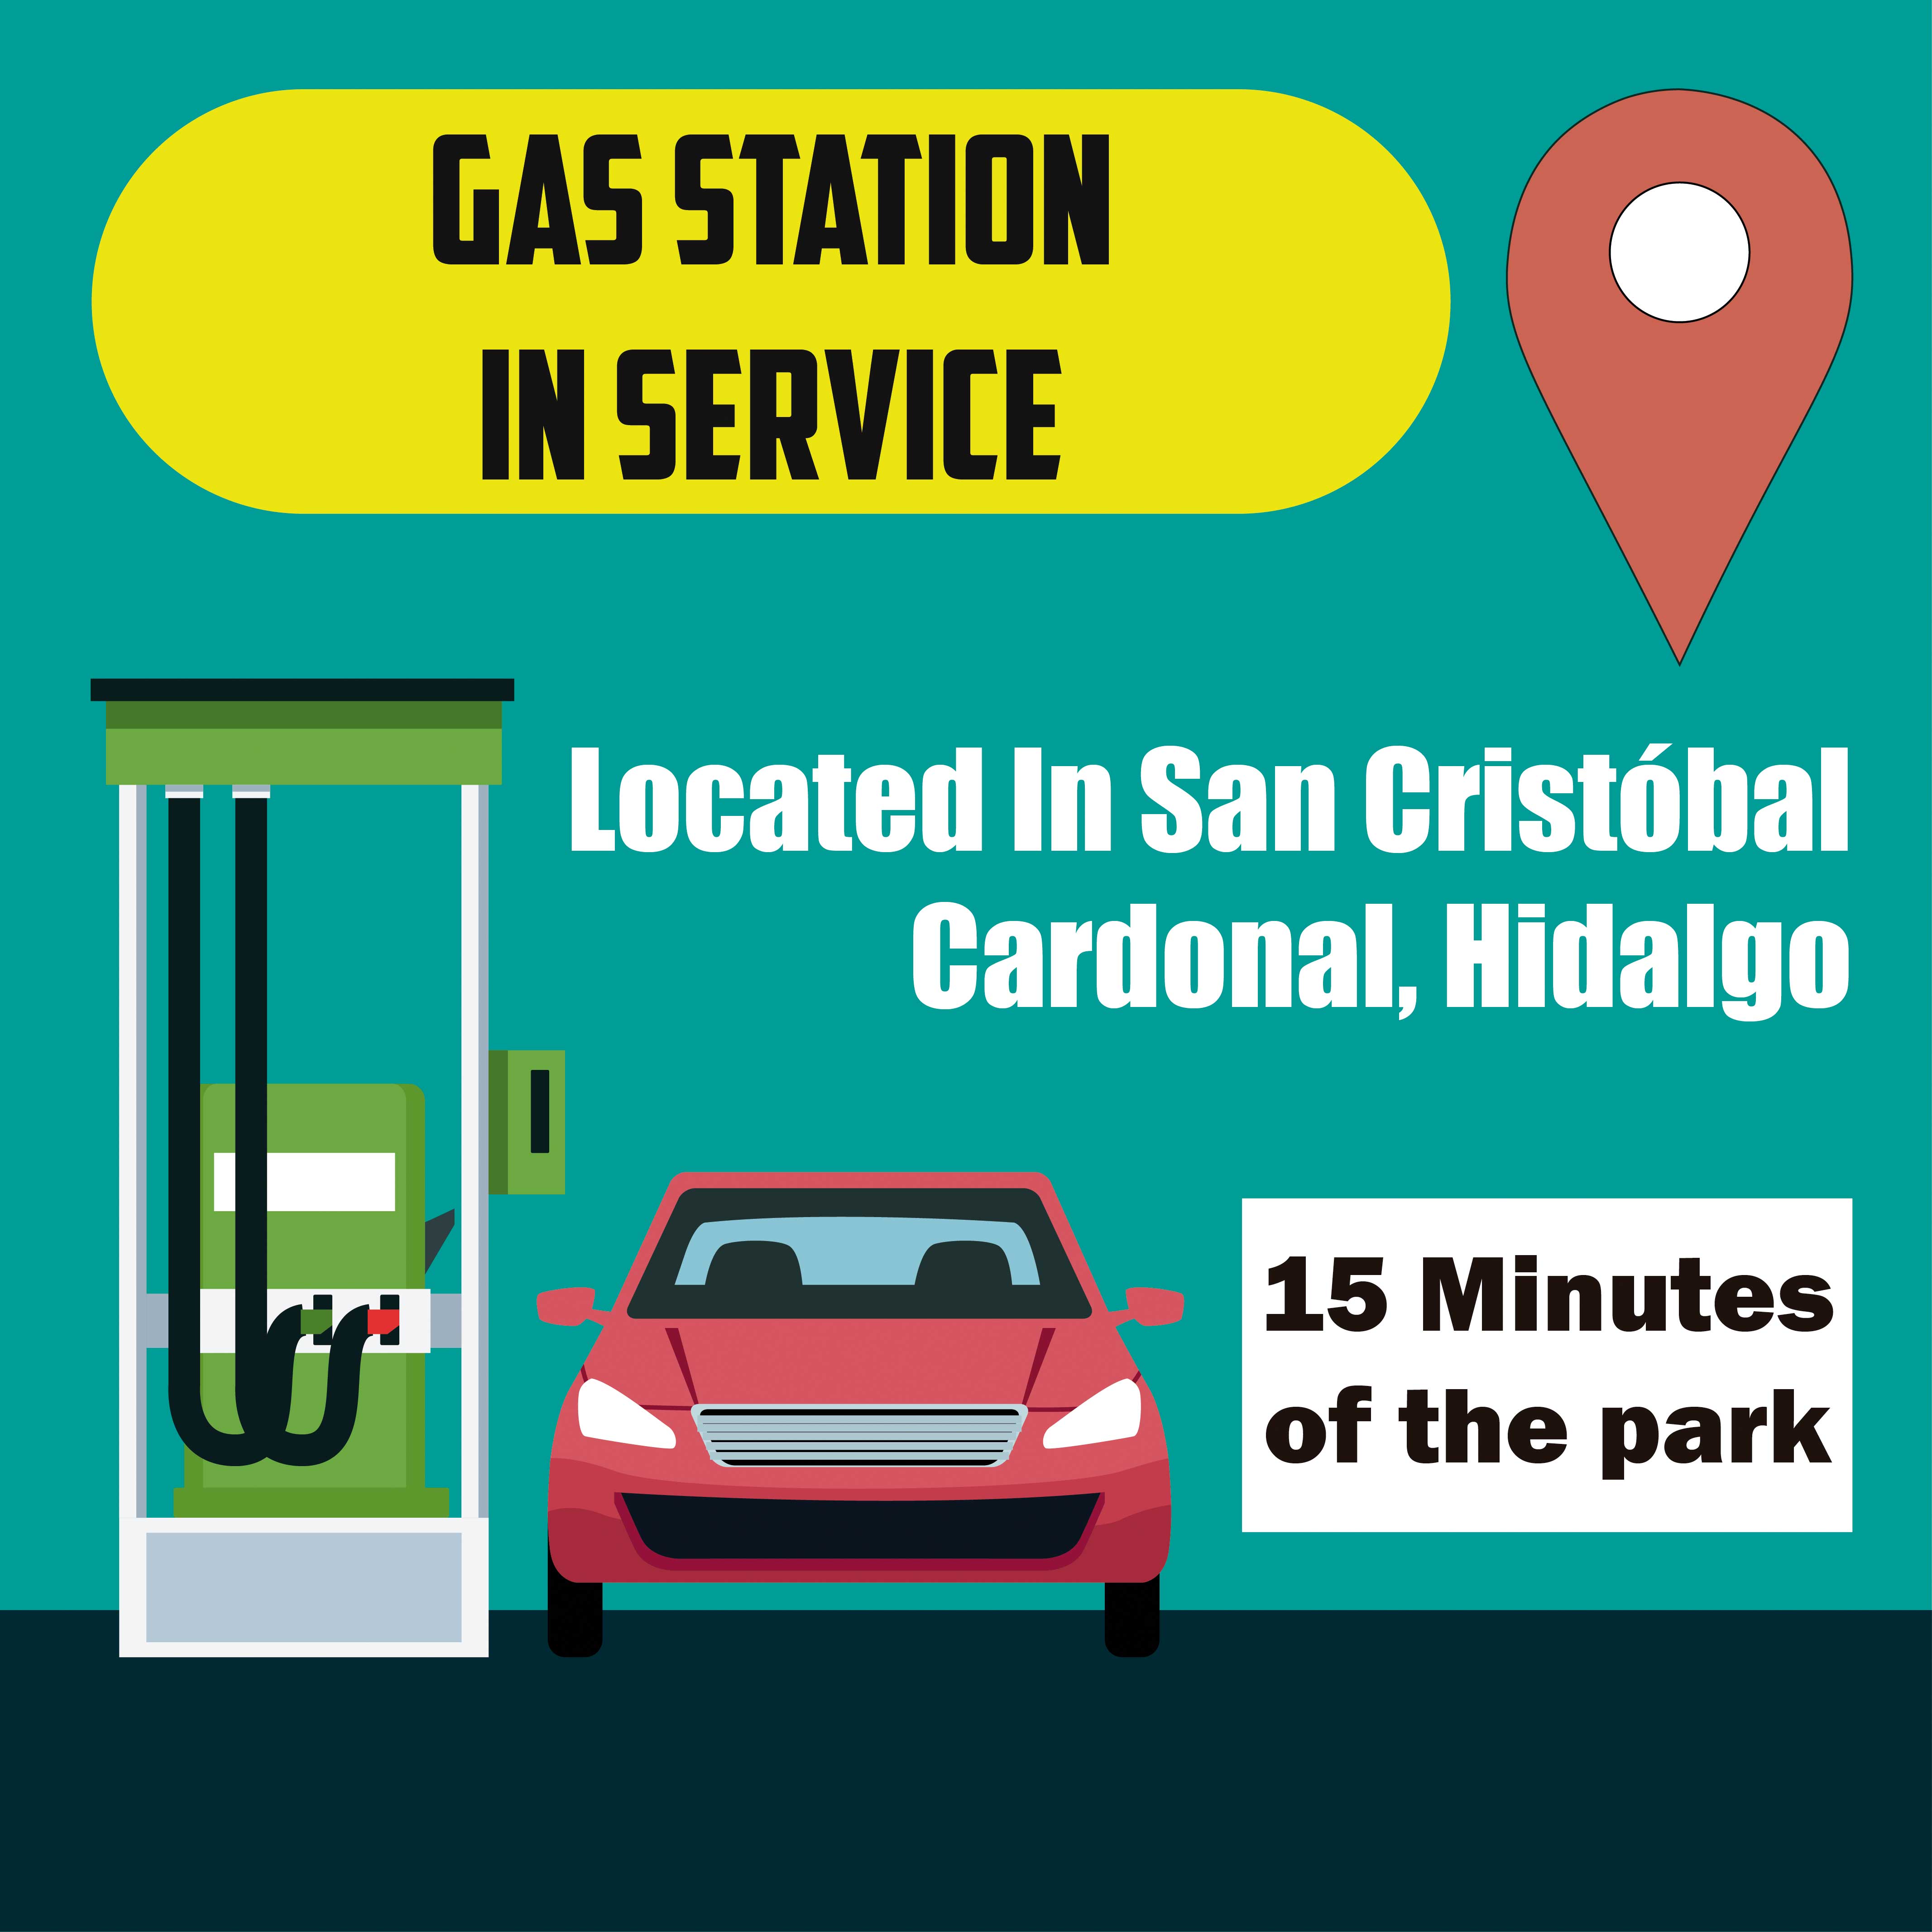 You can find a gas station service. It's a 15-minute drive from the park